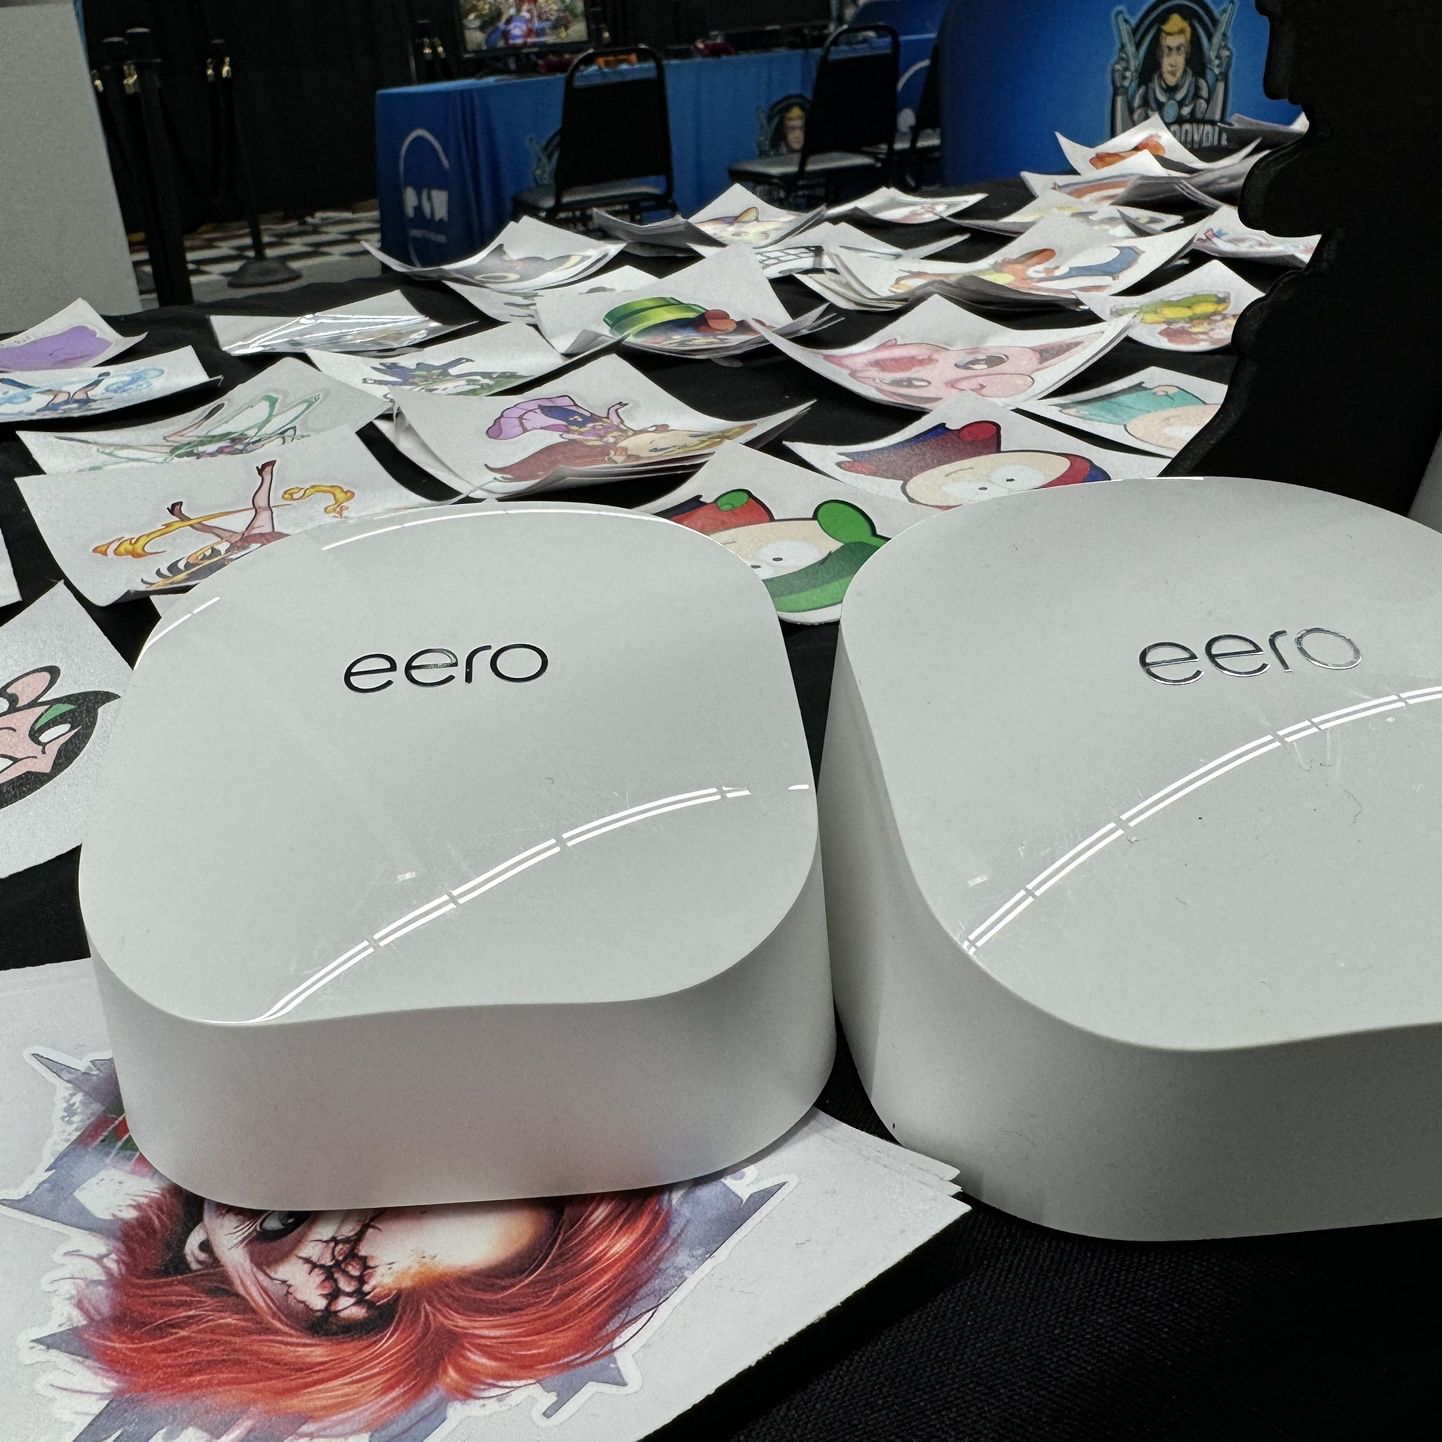 Eero 6 Router and Extender 